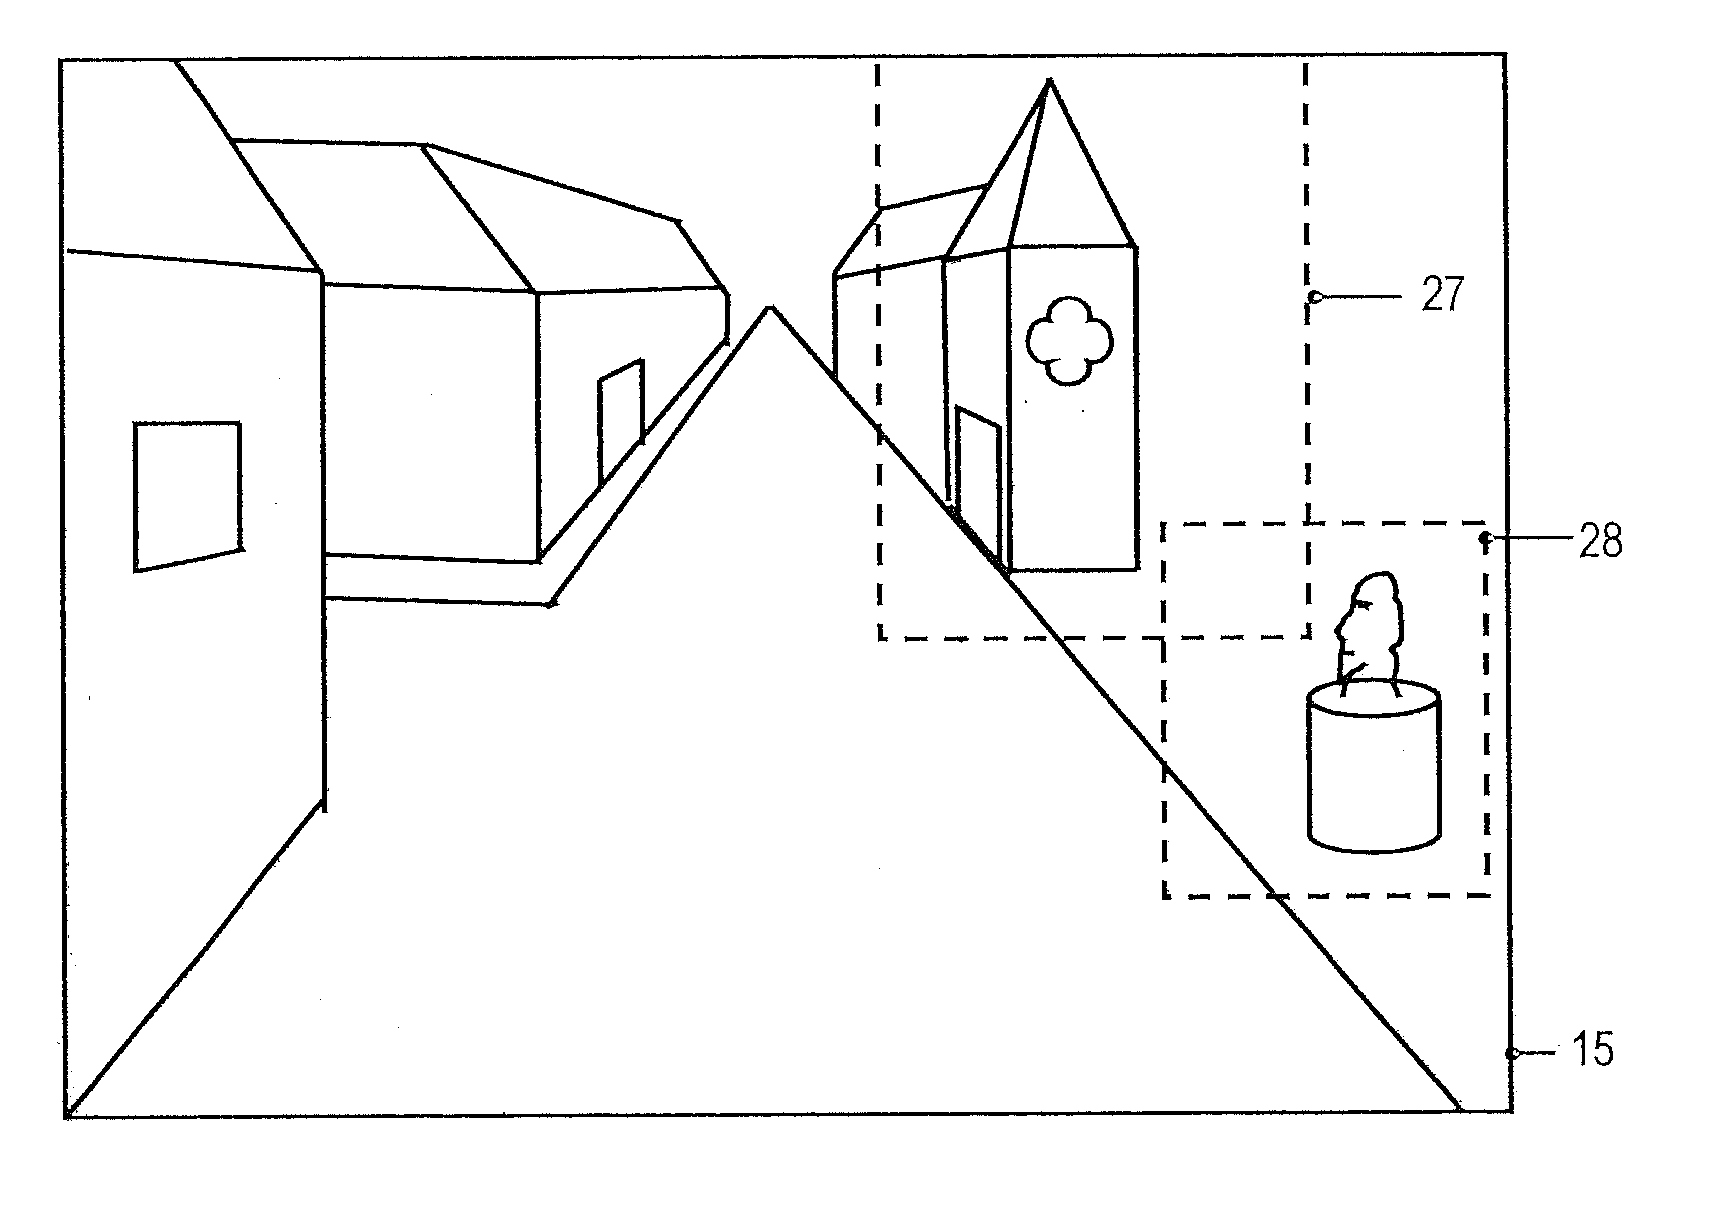 Vision system and method of analyzing an image